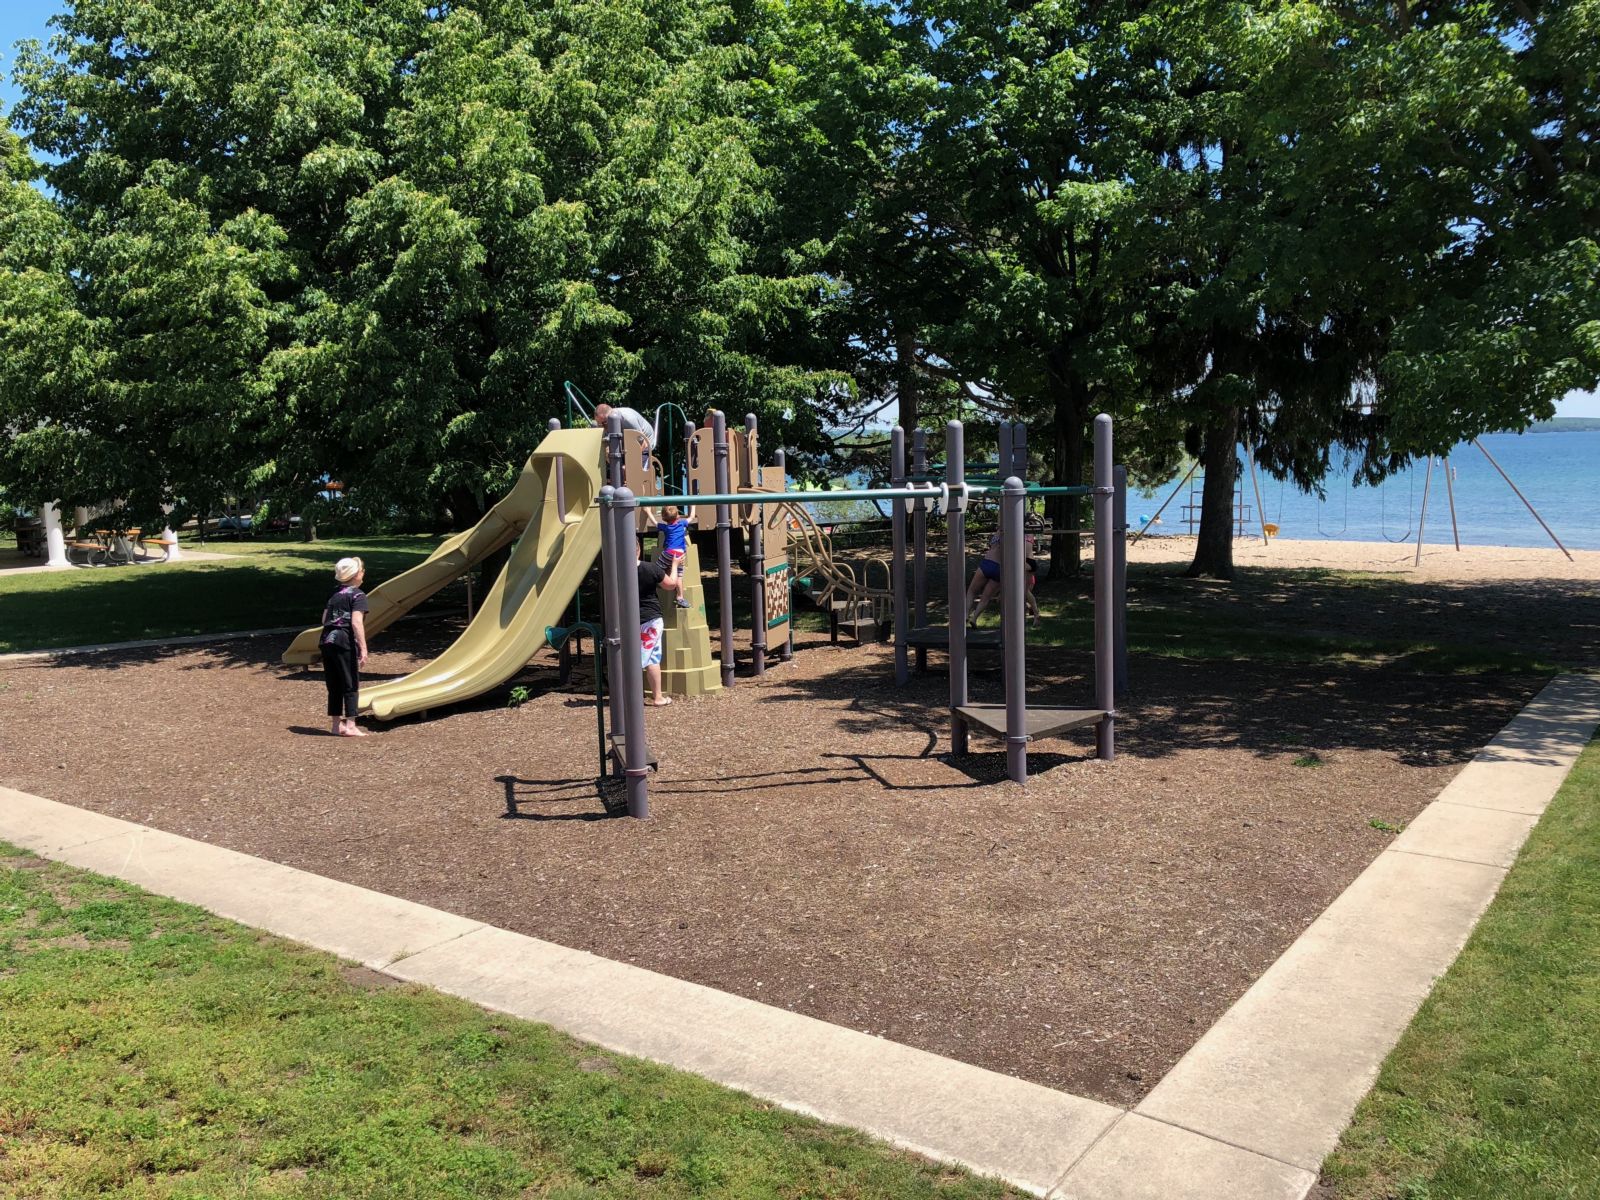 Depot Beach Playground surrounded by shady trees on the shore of Lake Charlevoix